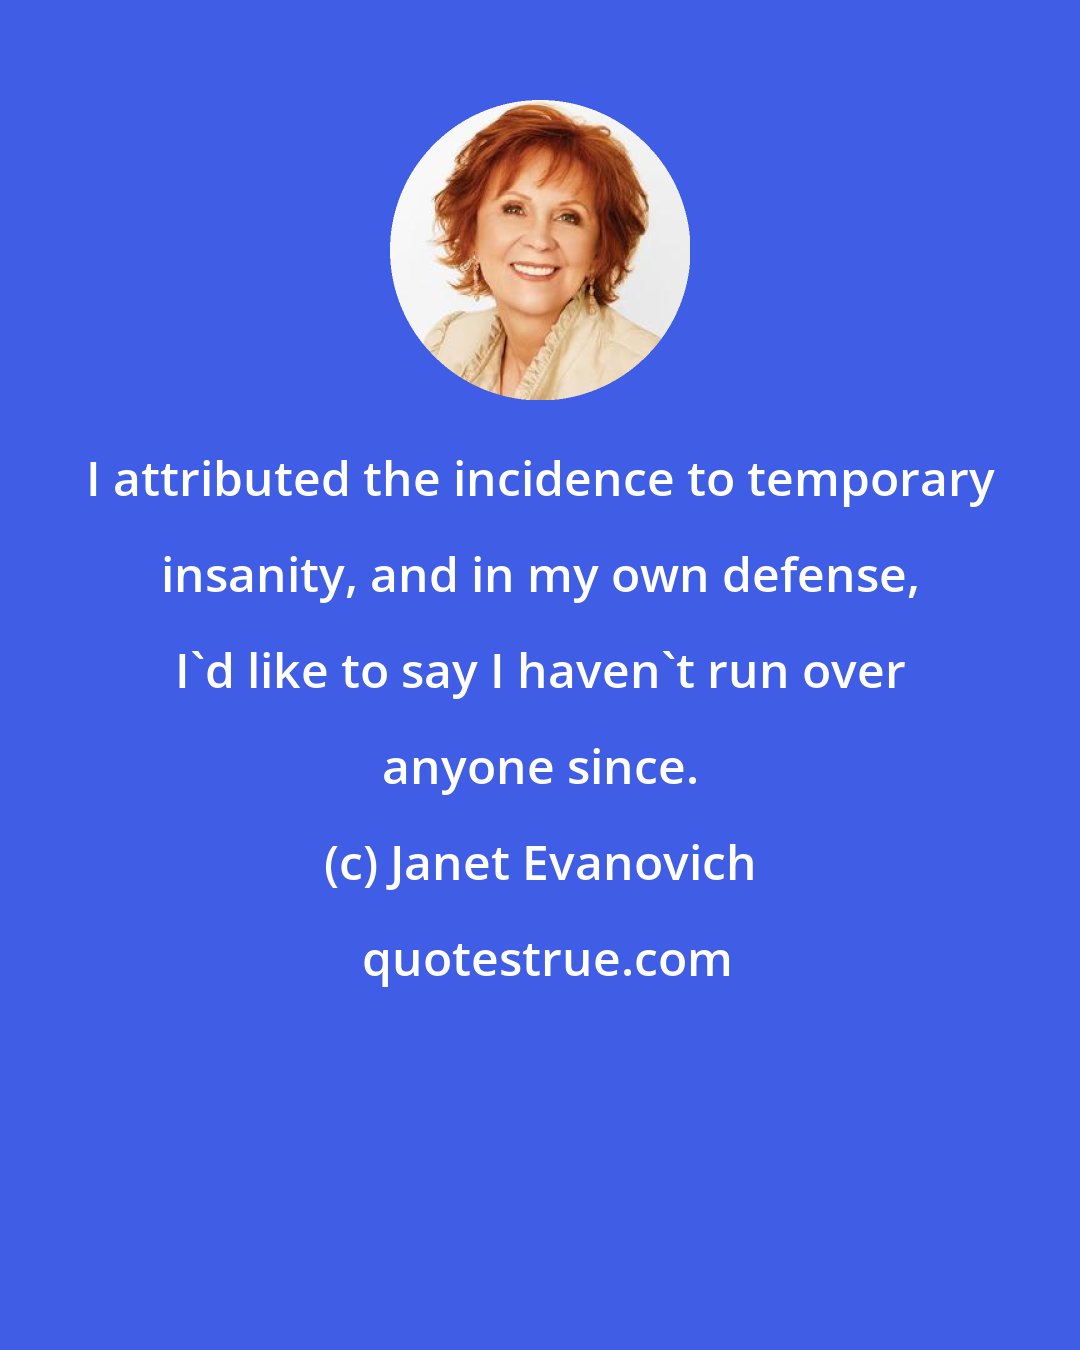 Janet Evanovich: I attributed the incidence to temporary insanity, and in my own defense, I'd like to say I haven't run over anyone since.